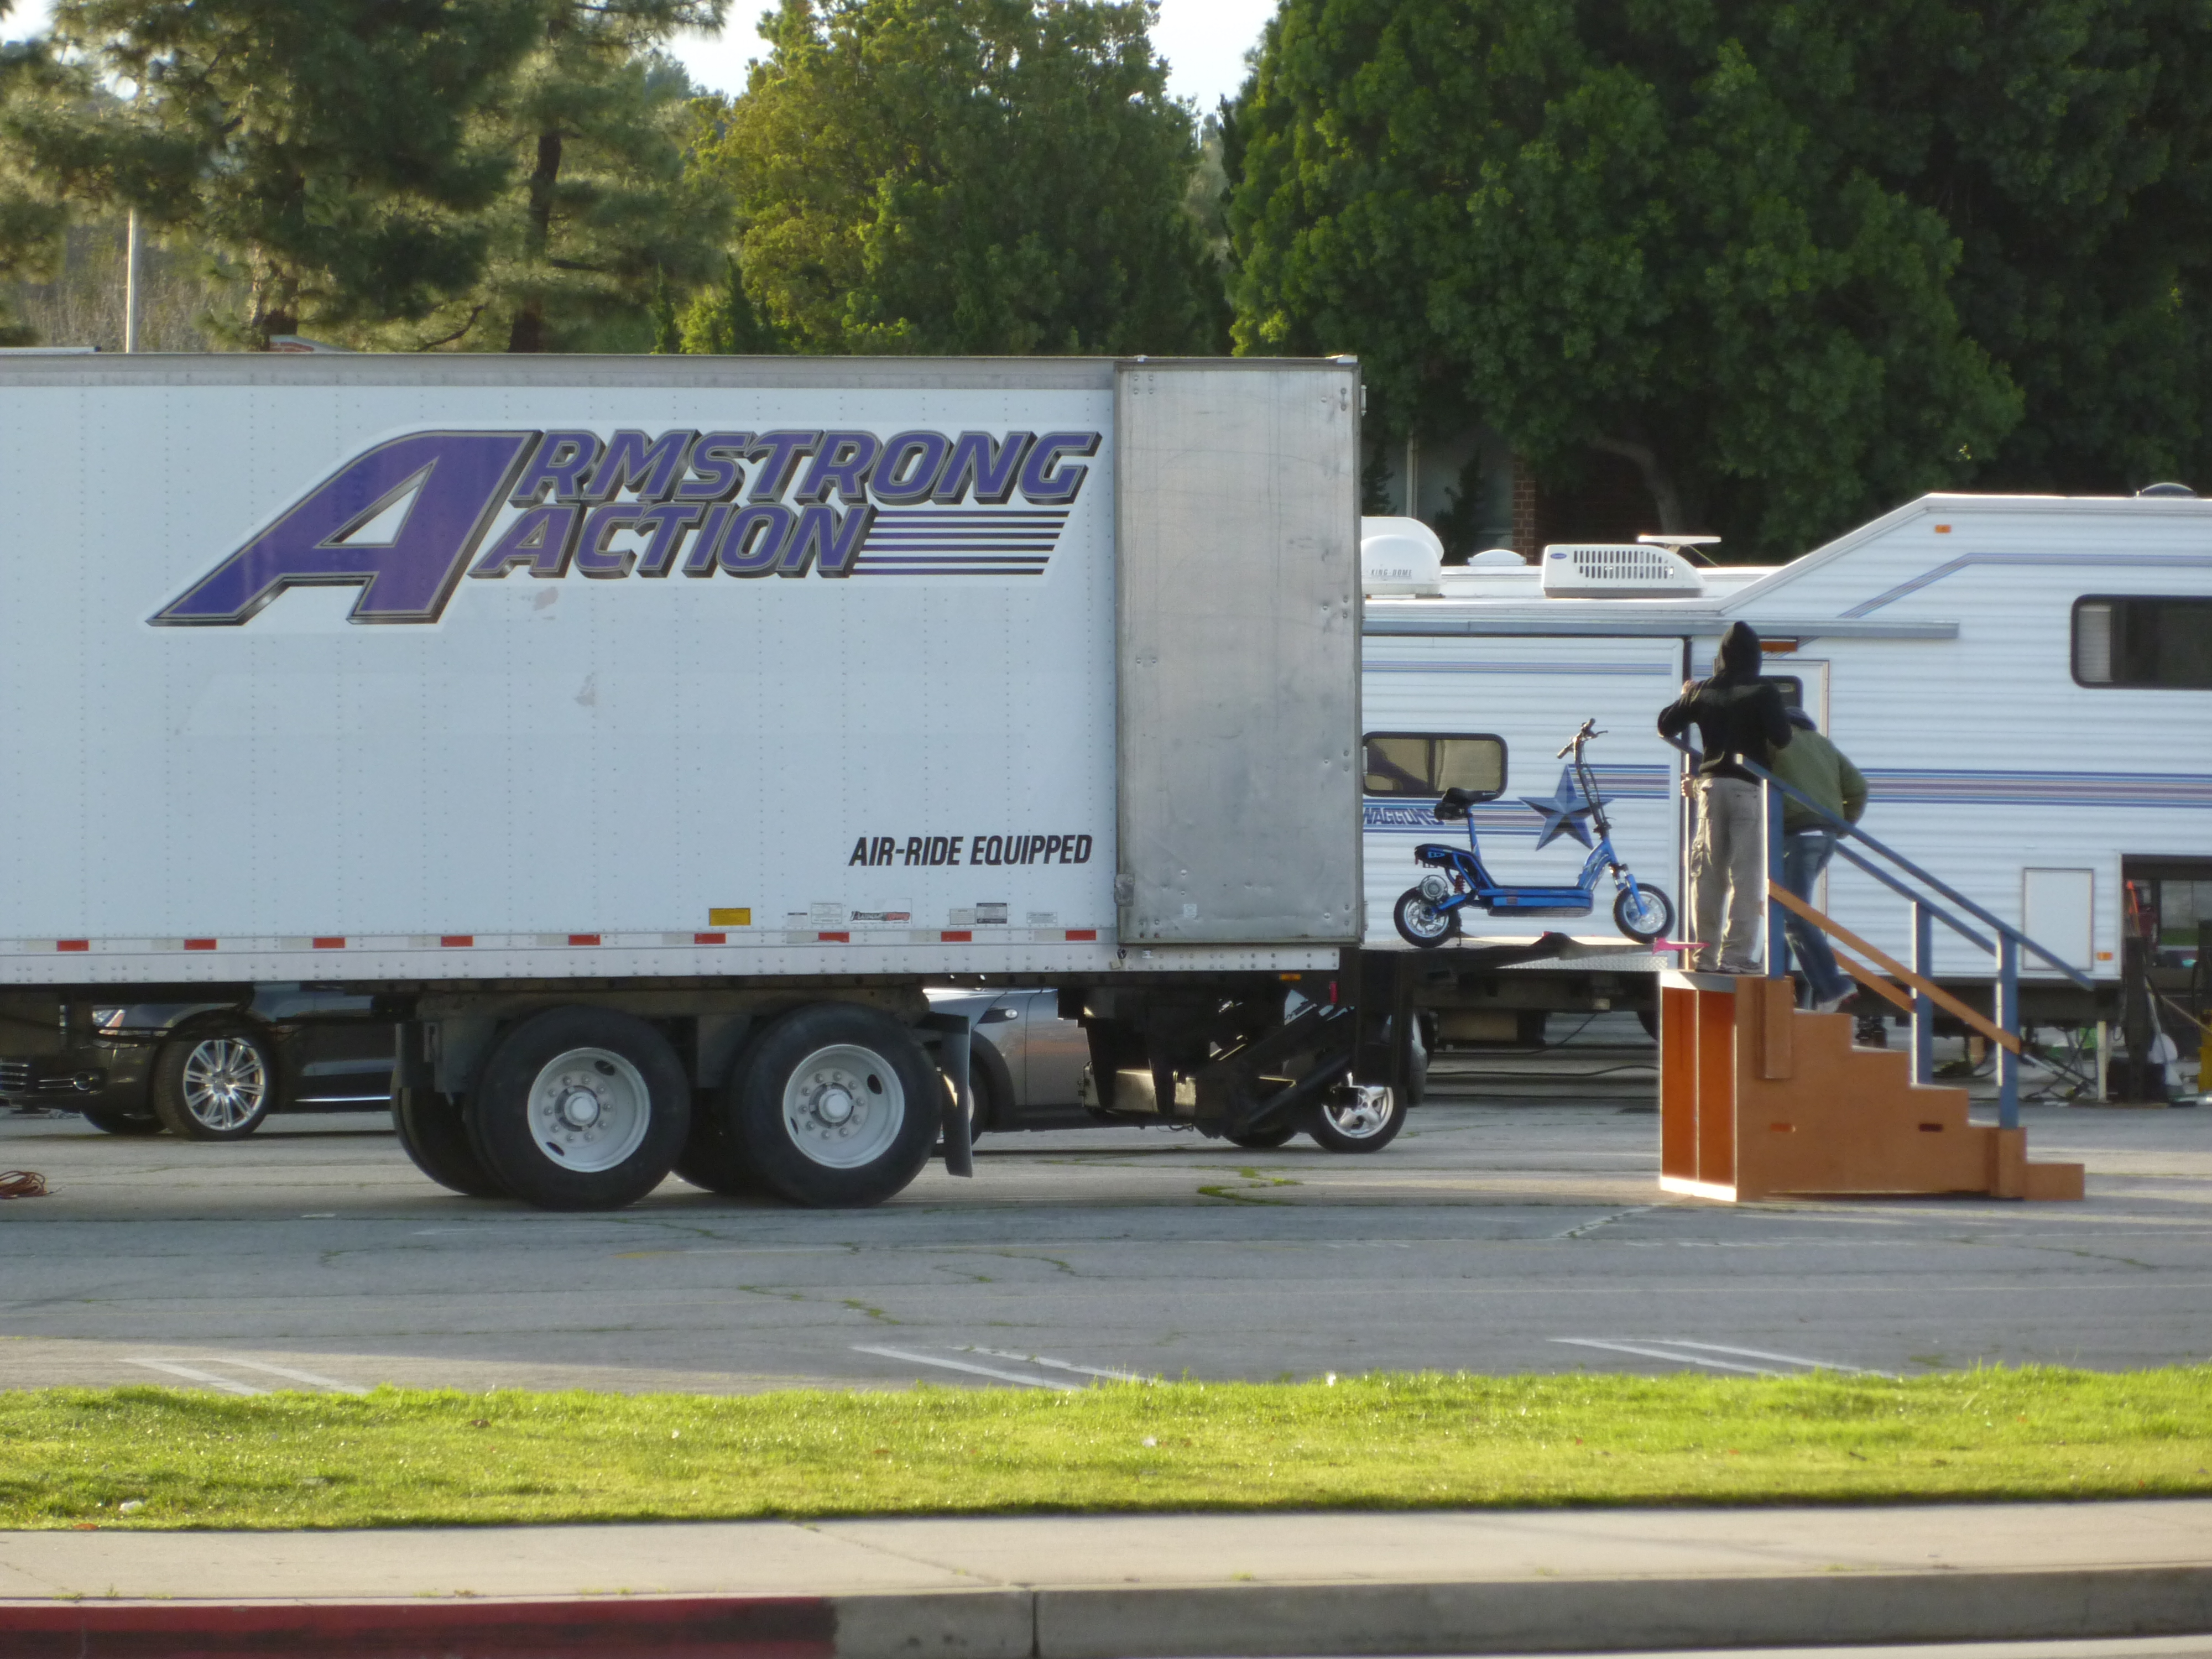 Armstrong Action 48 Foot Trailer #1 on location on 